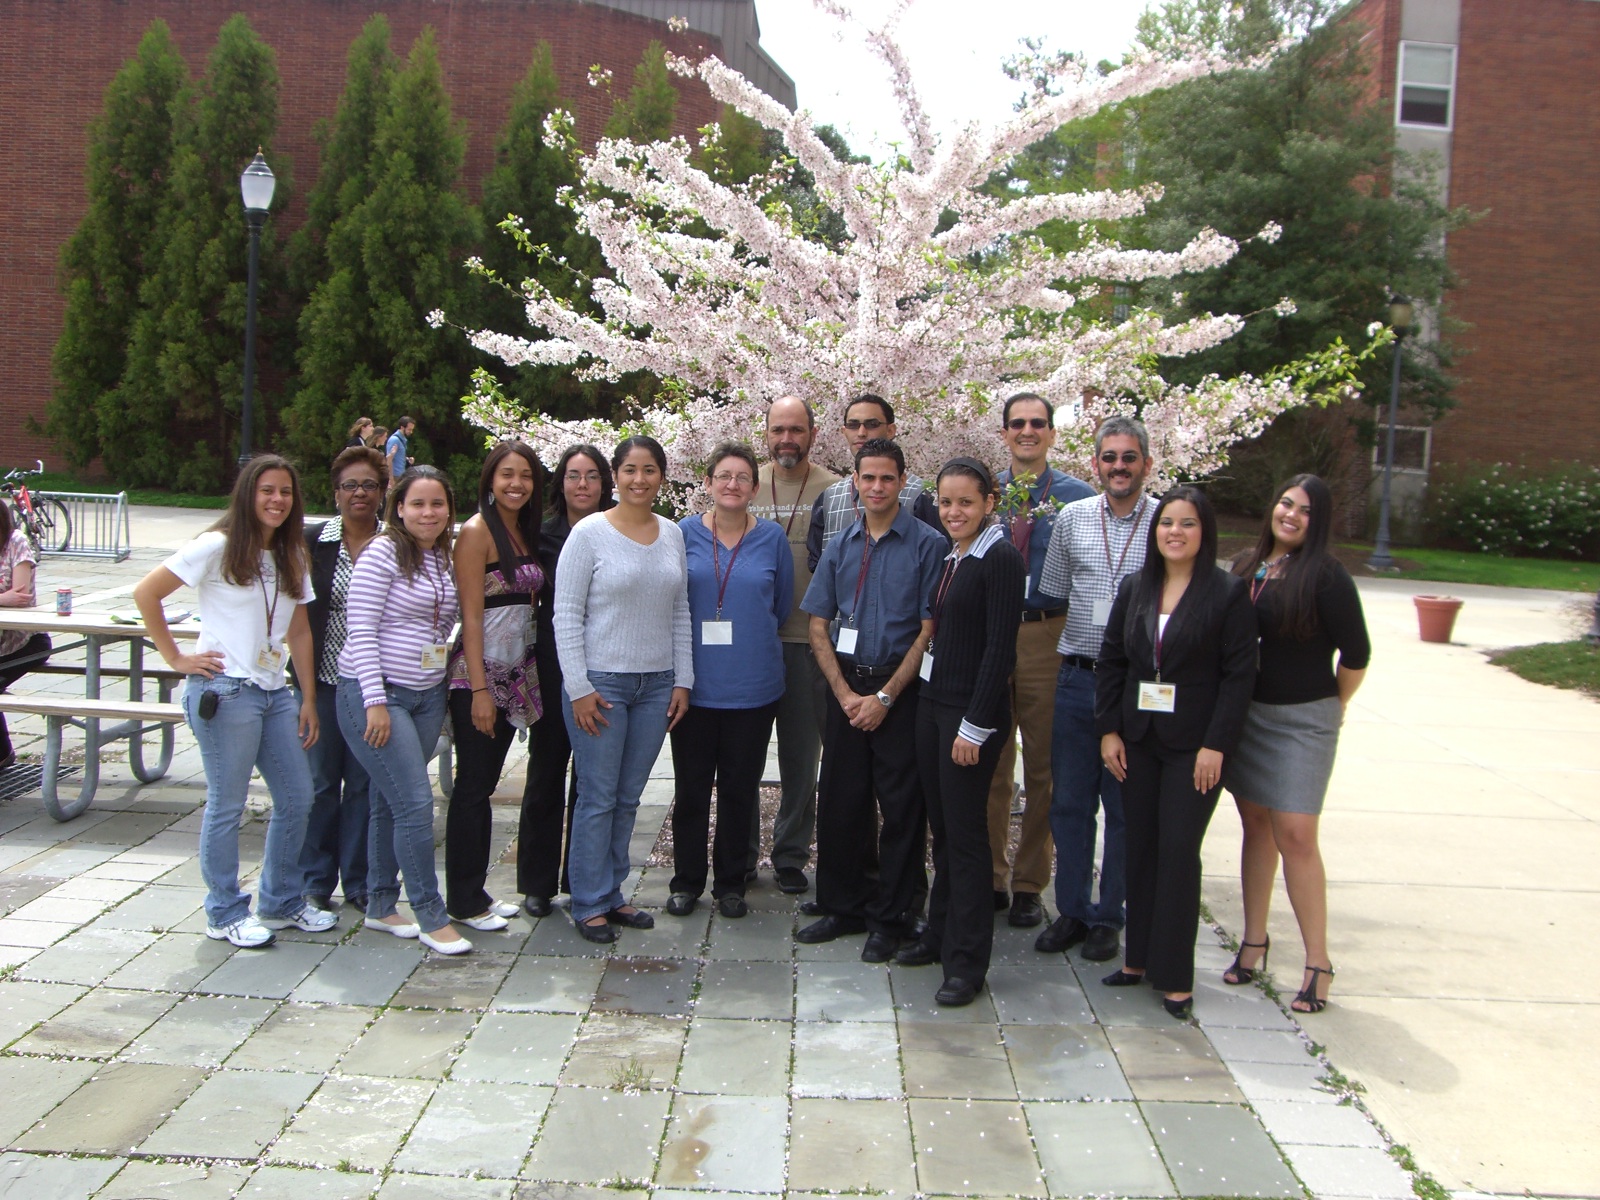 URMAA and PREM students and faculty in the 2008 NCUR meeting at Sallisbury, Maryland